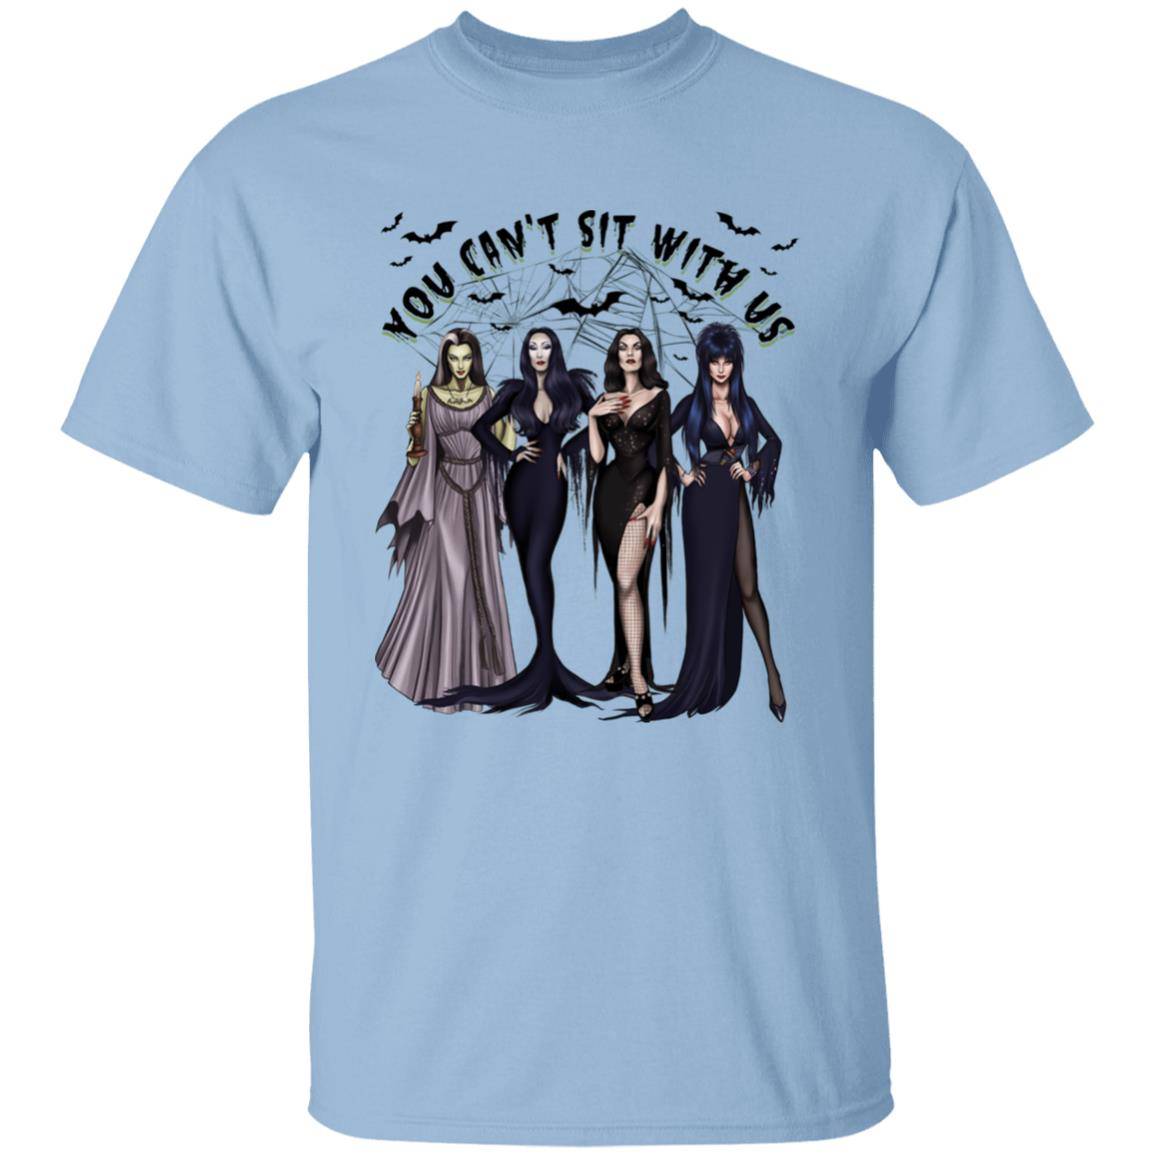 Can't Sit with Us Female Vilians Halloween T-Shirt / anygiftforyou